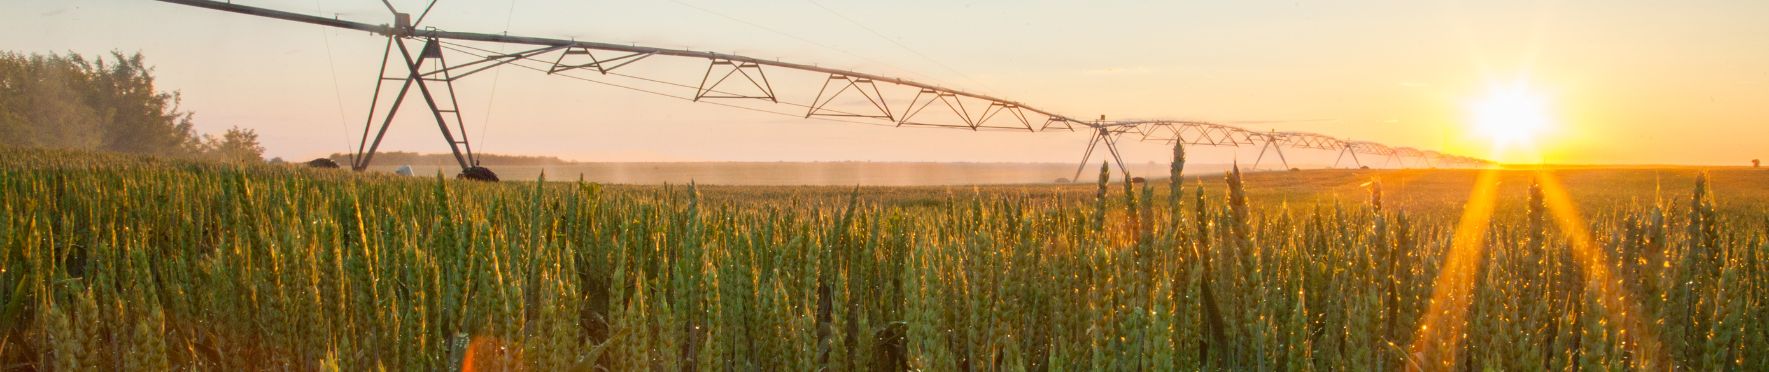 the sun is setting behind a irrigation system in a field of wheat .